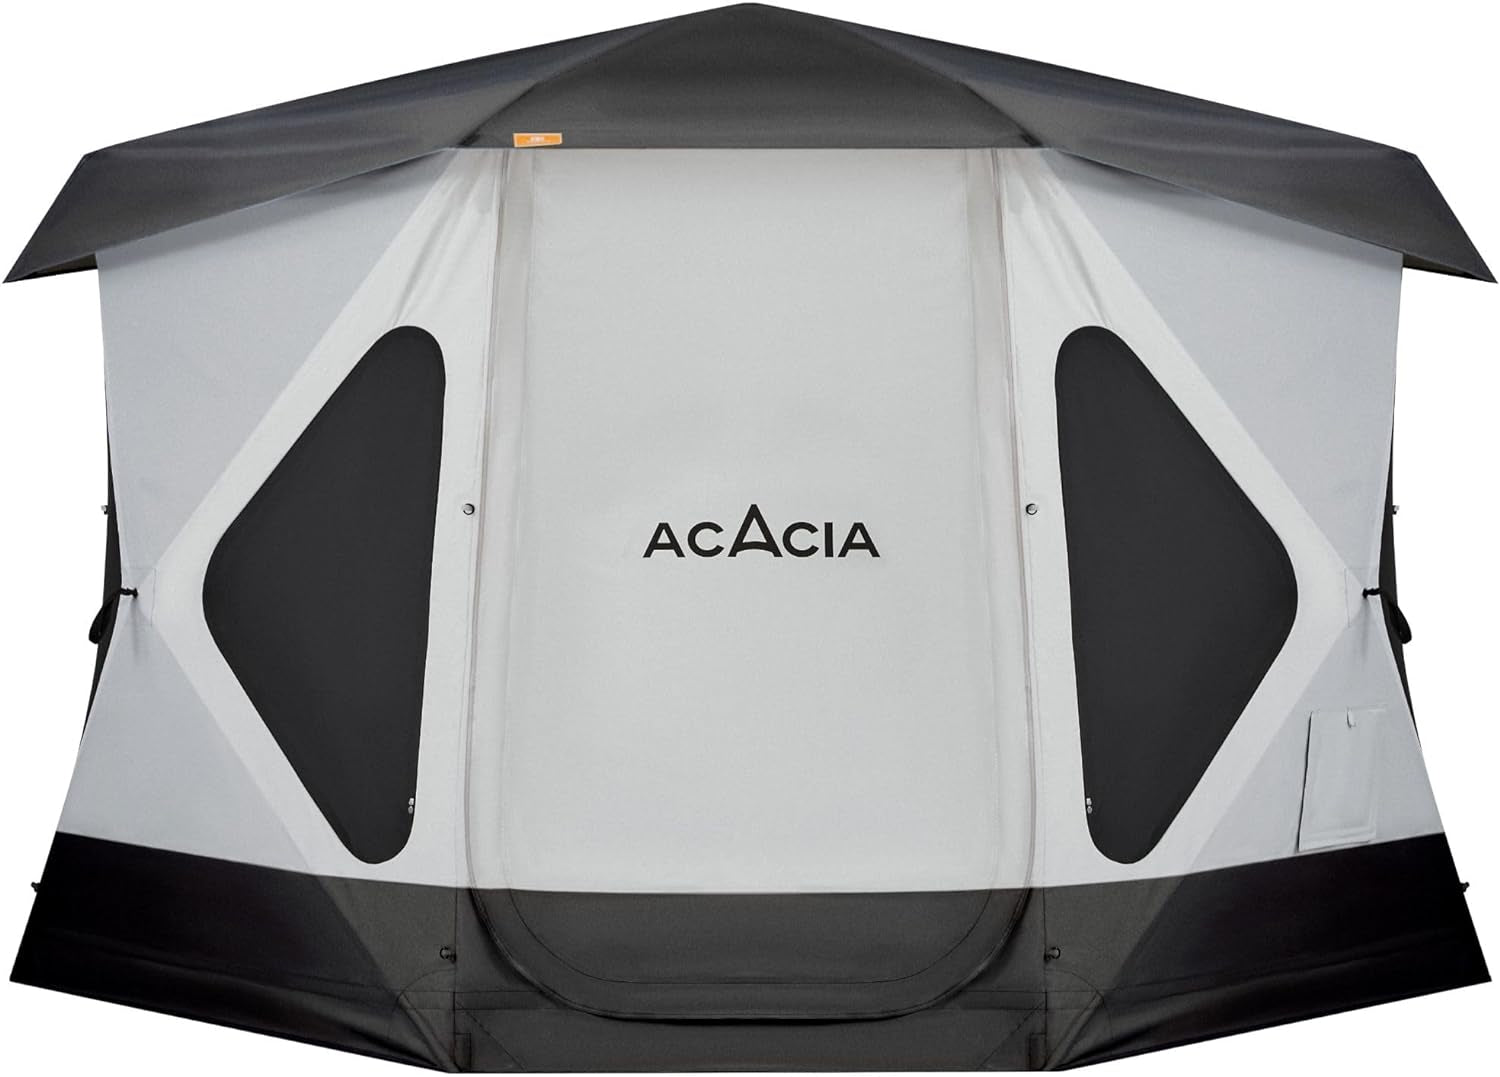 Space Acacia Camping Tent XL, 4-6 Person Large Family Tent with 6'10'' Height, 2 Doors, 8 Windows, Waterproof Pop up Easy Setup Hub Tent with Rainfly, Footprint for Car Camping, Glamping, Black